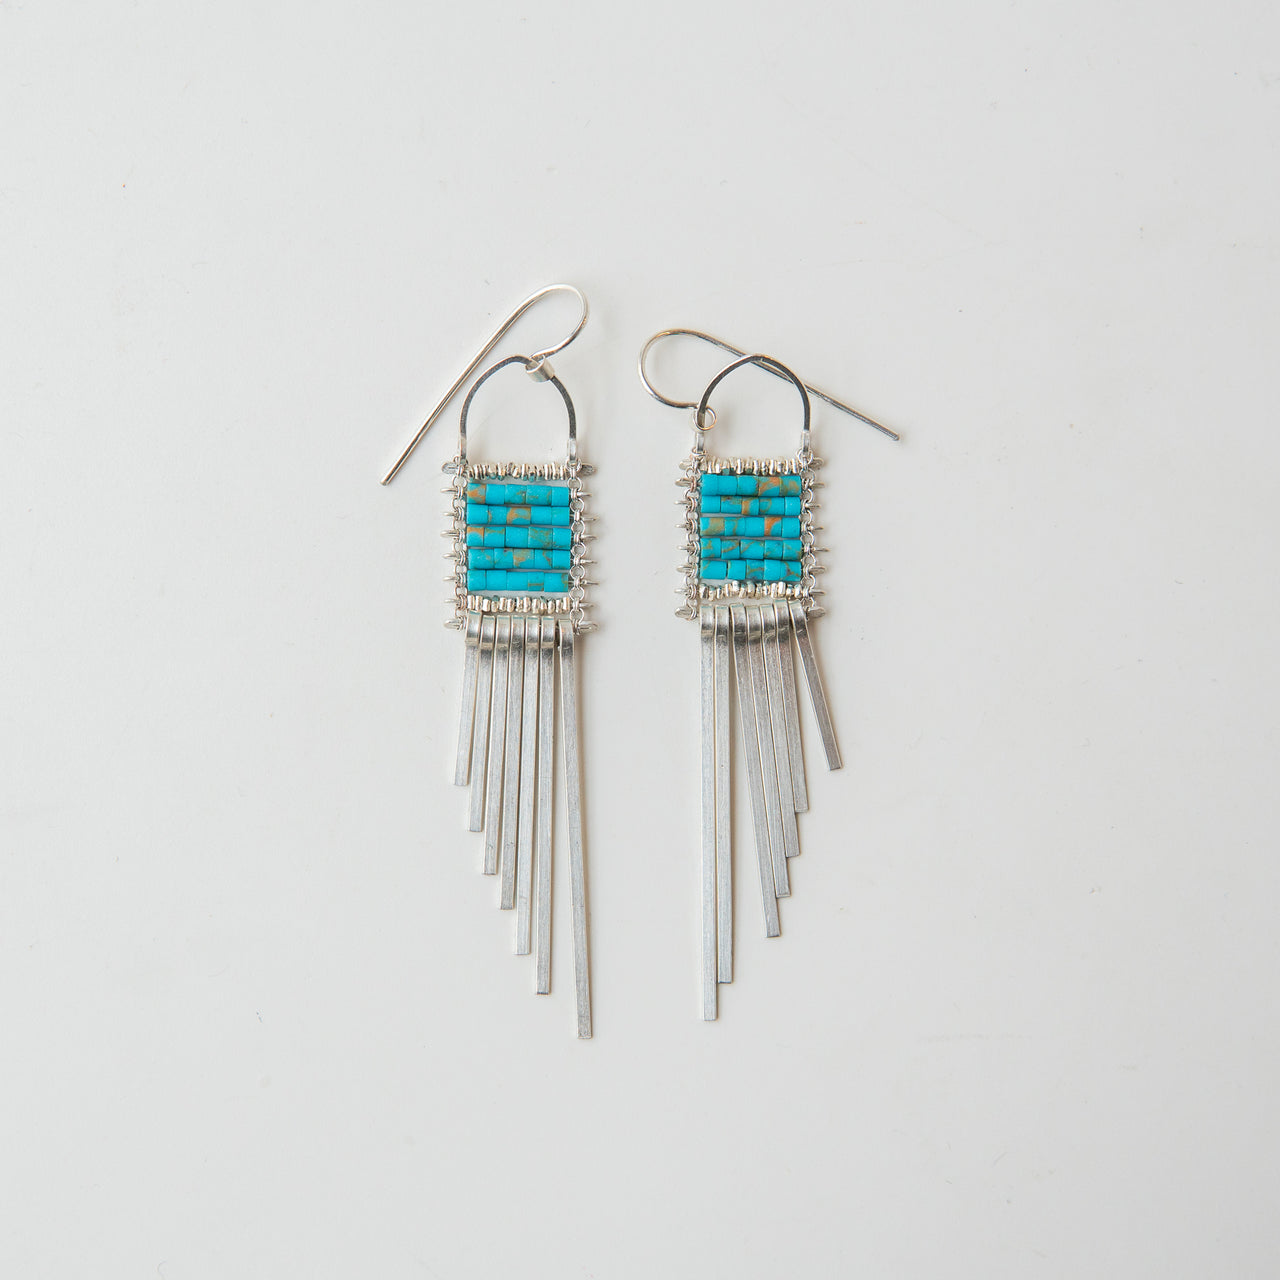 Turquoise and Silver Asymmetrical Earrings